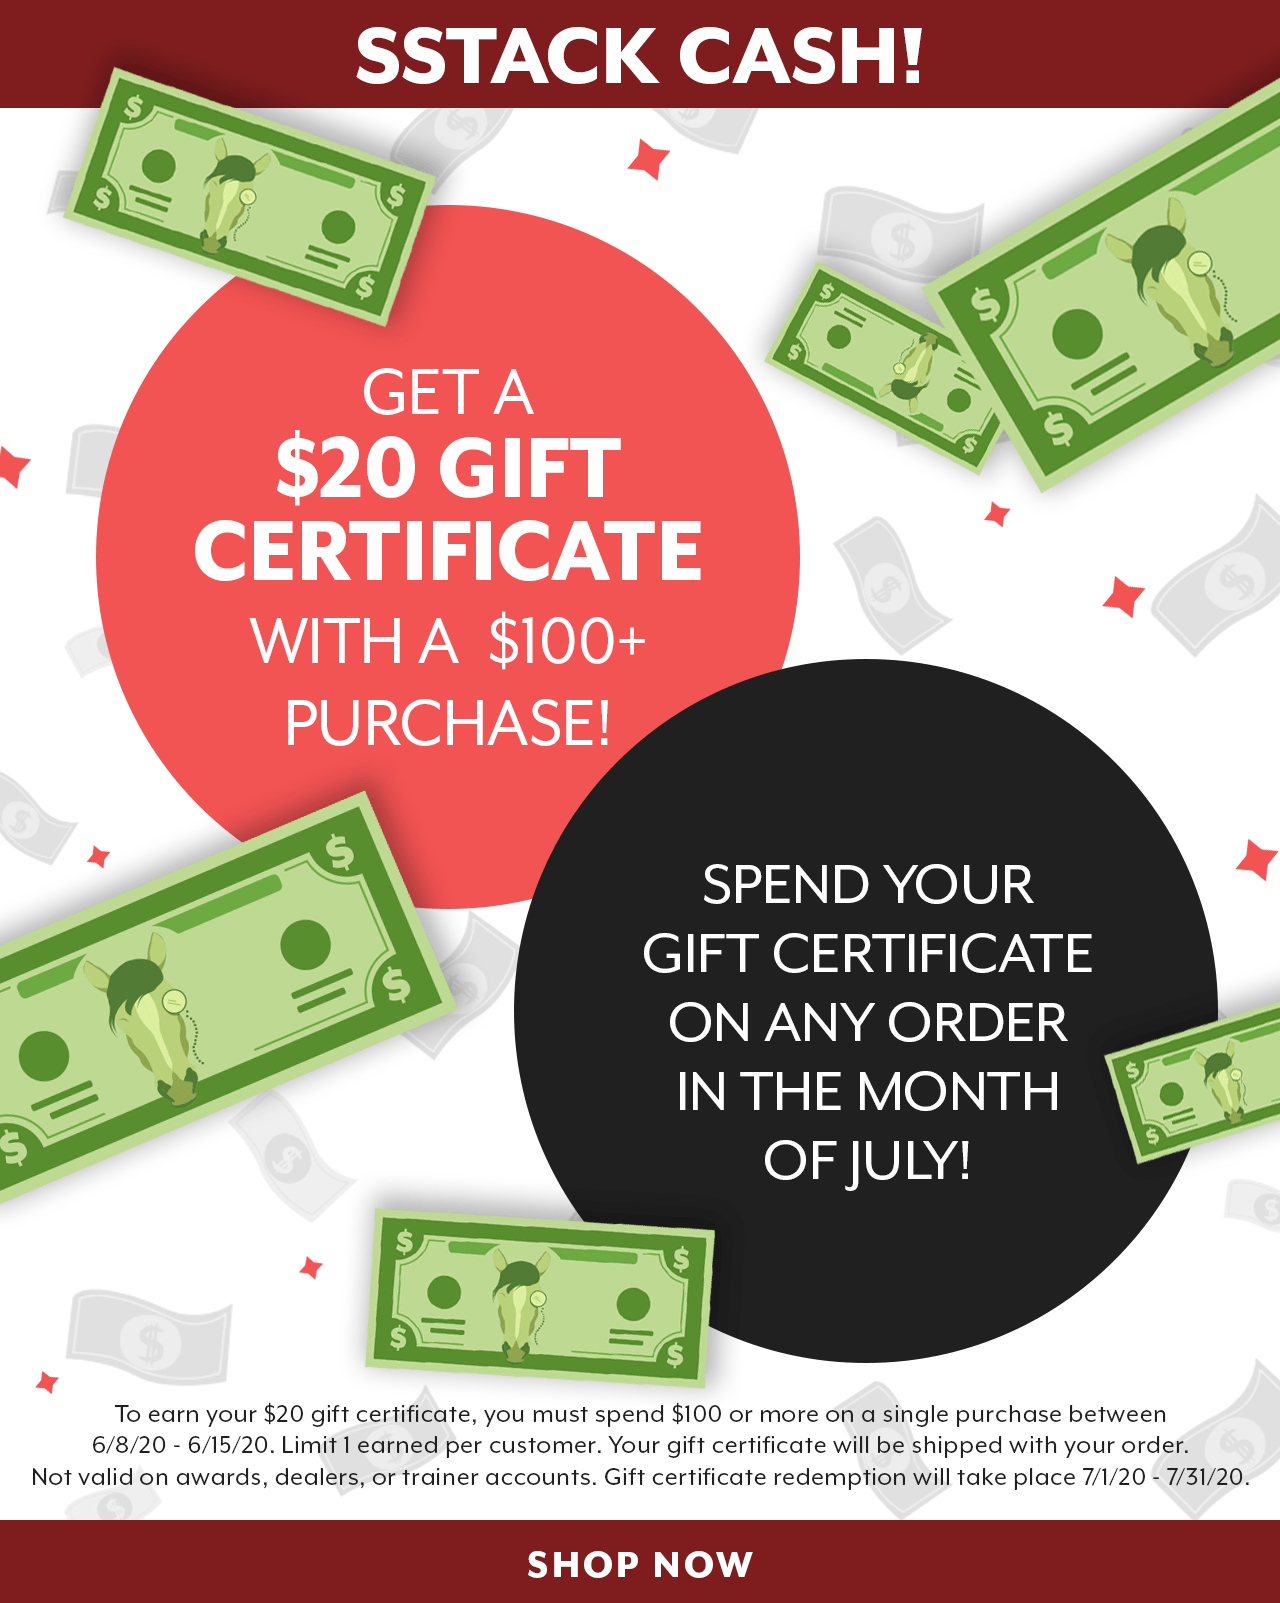 Earn a $20 SStack Cash gift certificate when you spend $100+ between 6/8/20 - 6/15/20. Limit 1 per customer. Redeemable 7/1/20 - 7/31/20.